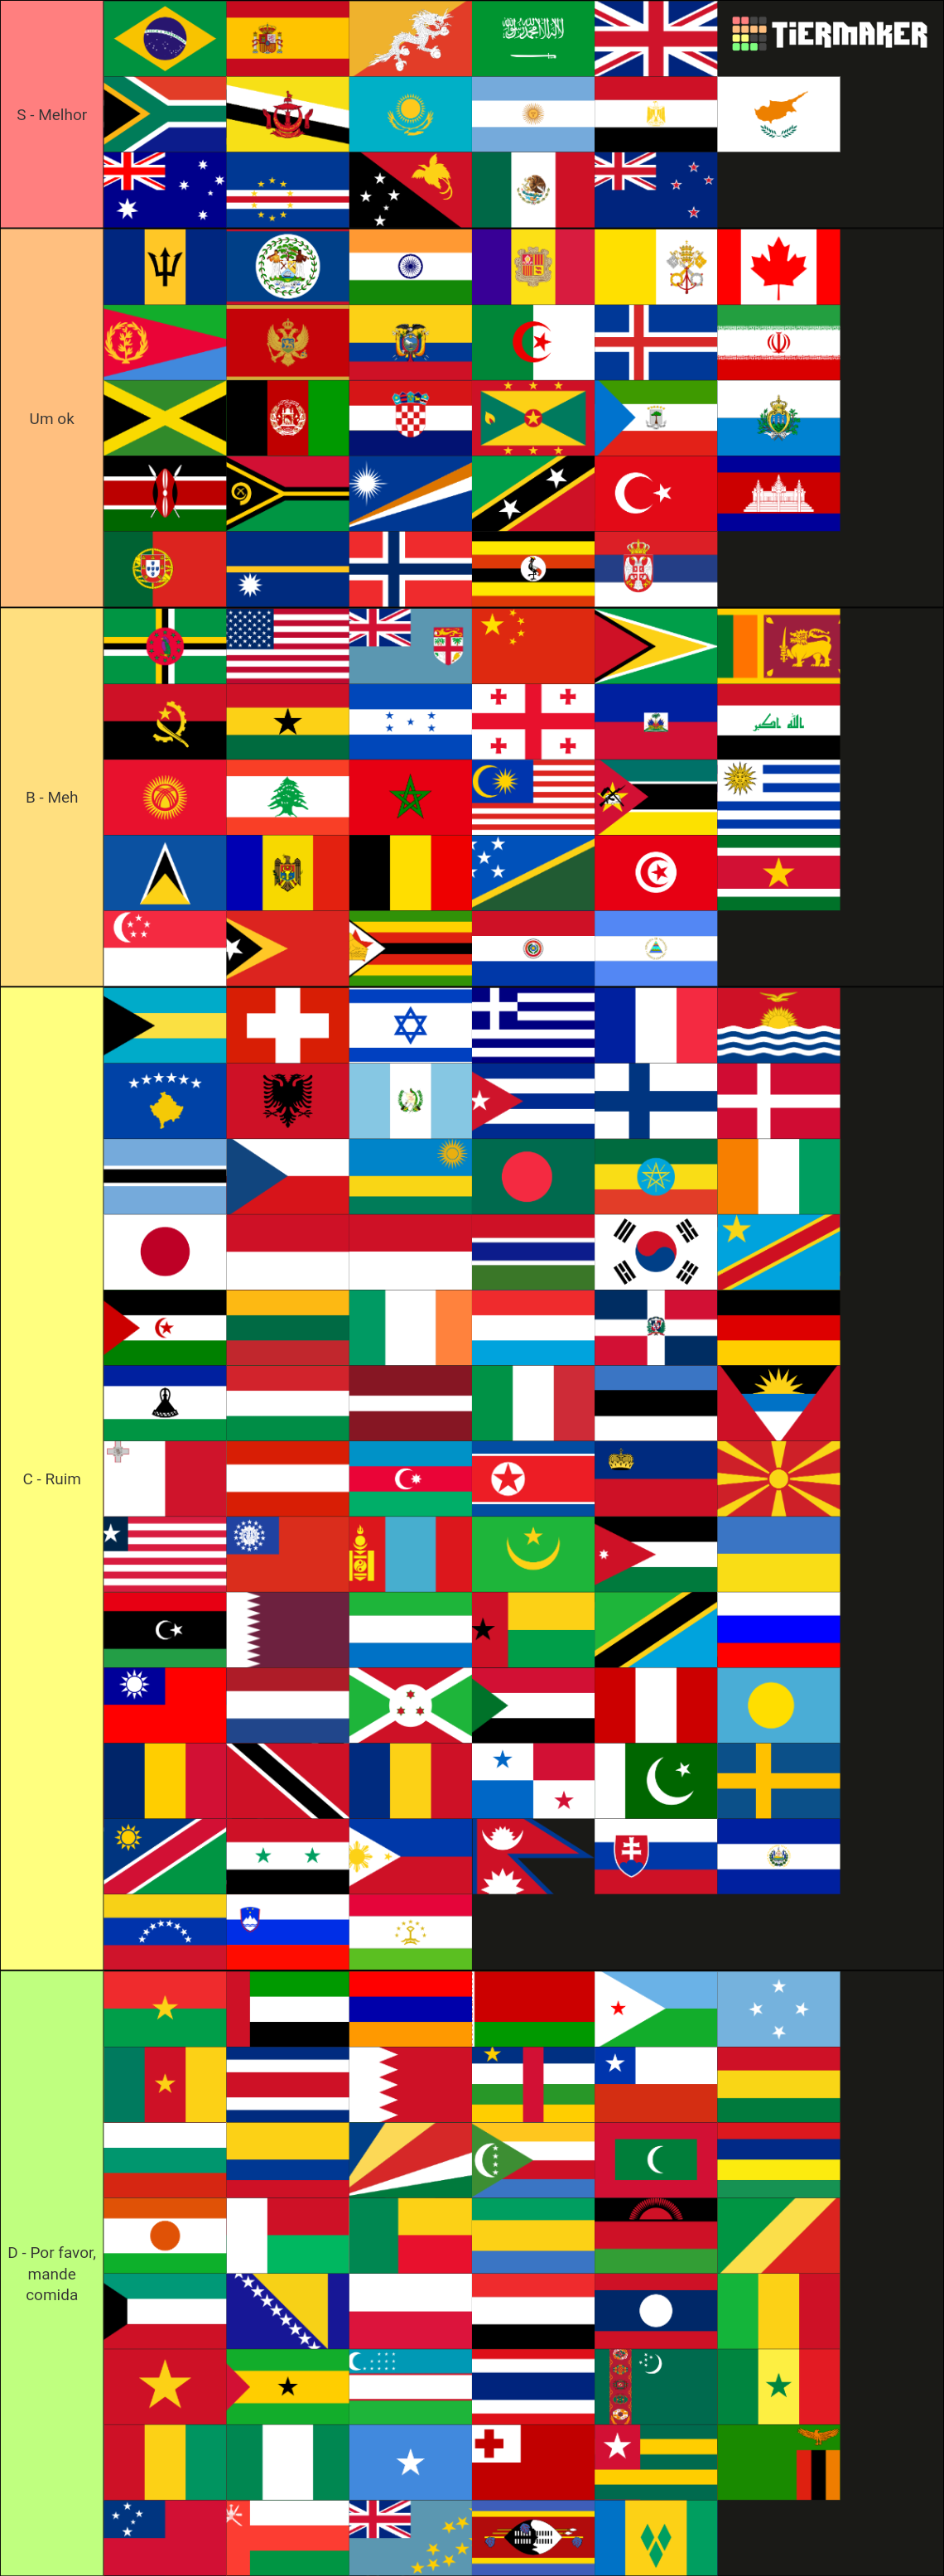 Countries of the World, ranked Tier List (Community Rankings) - TierMaker